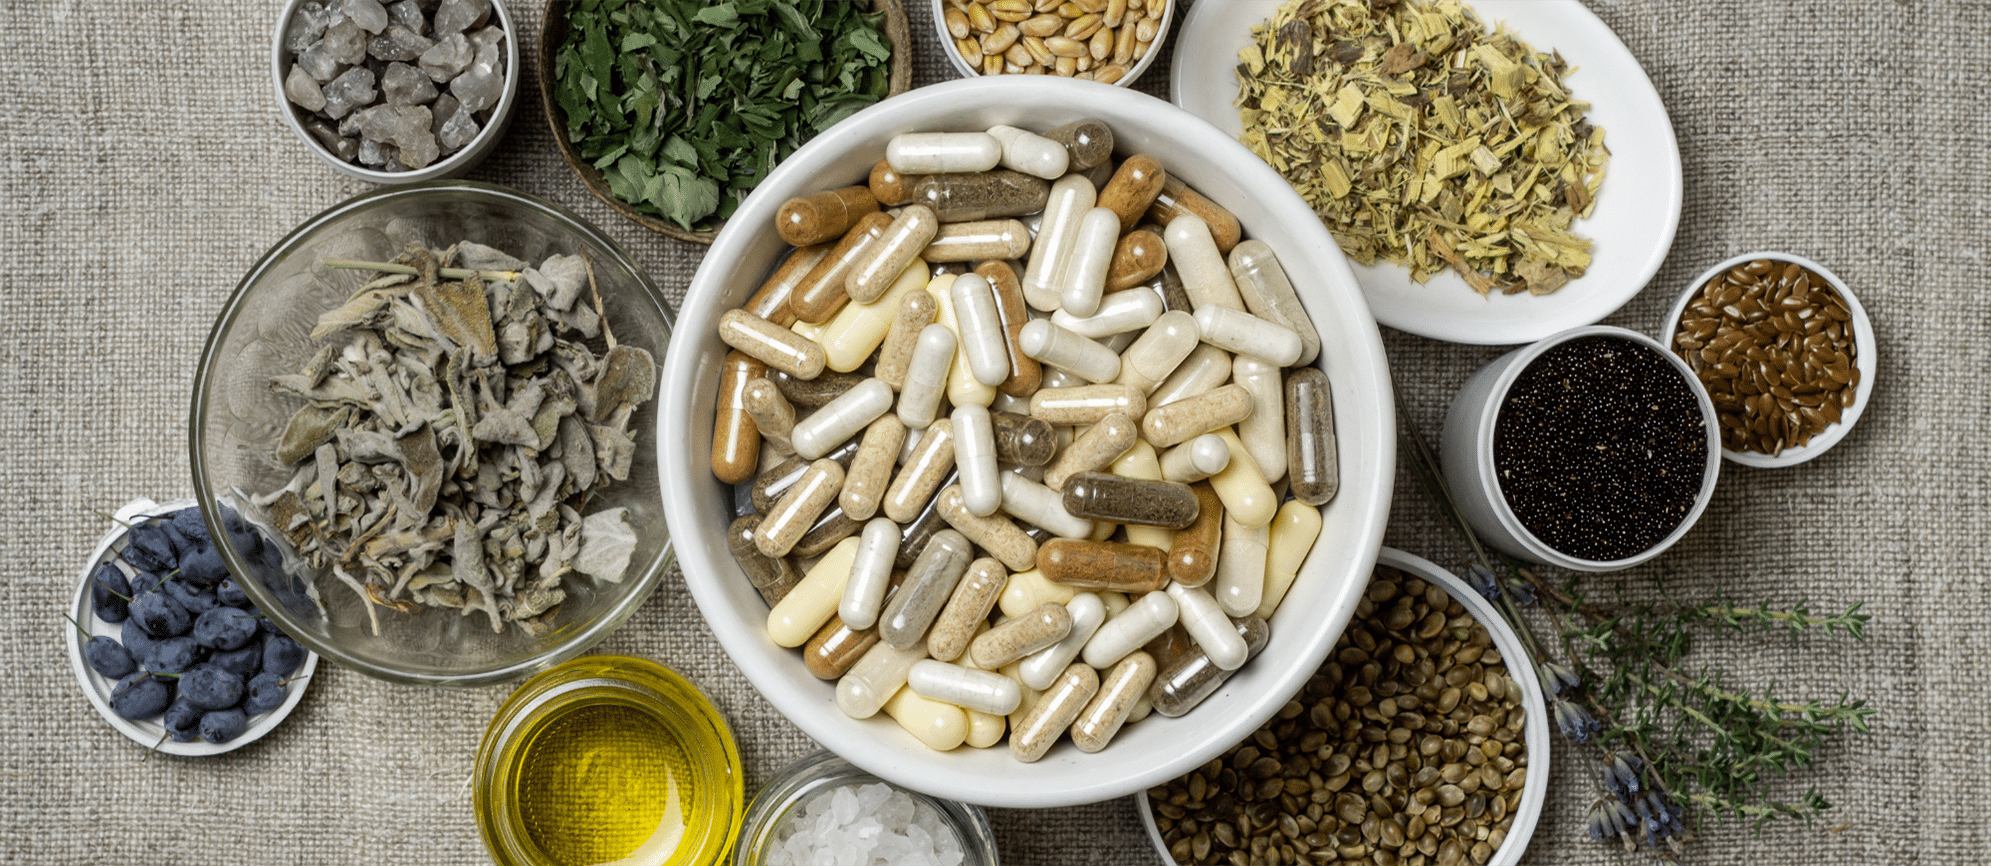 bowls of herbs, crystals, and medication supplements